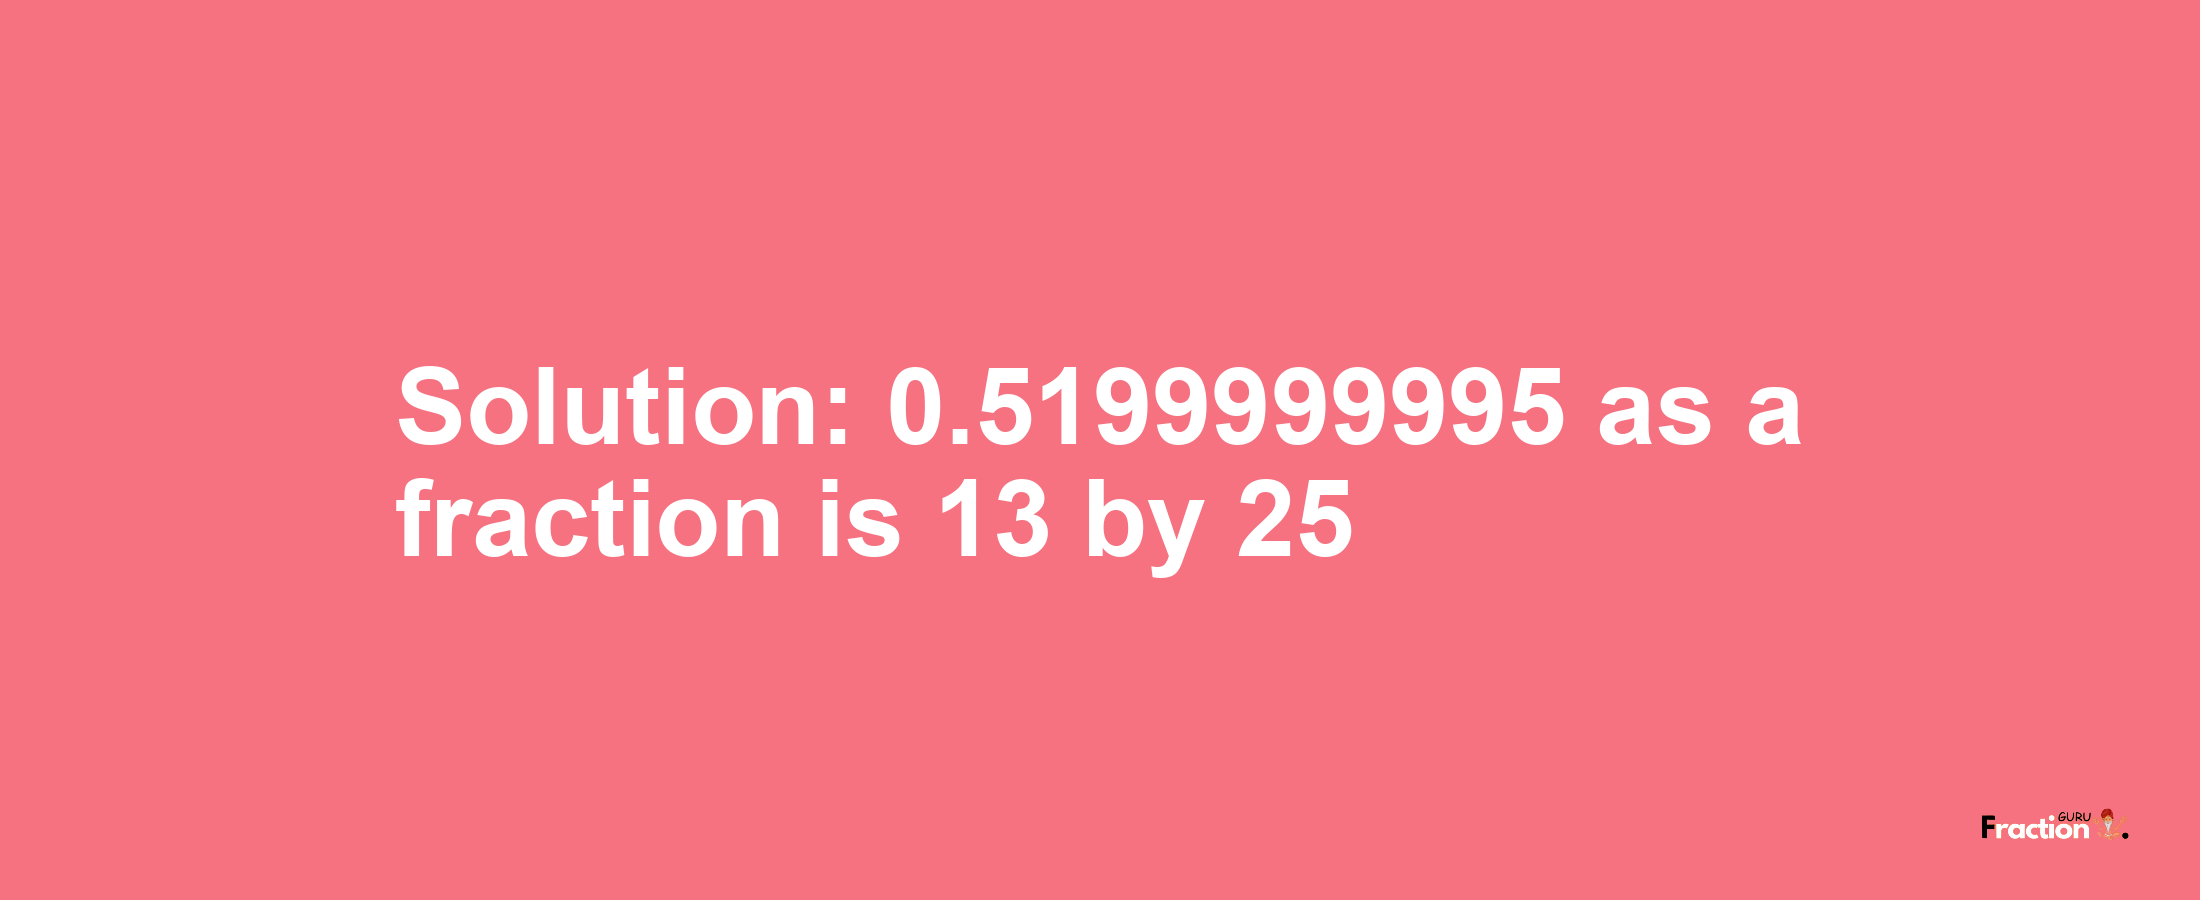 Solution:0.5199999995 as a fraction is 13/25